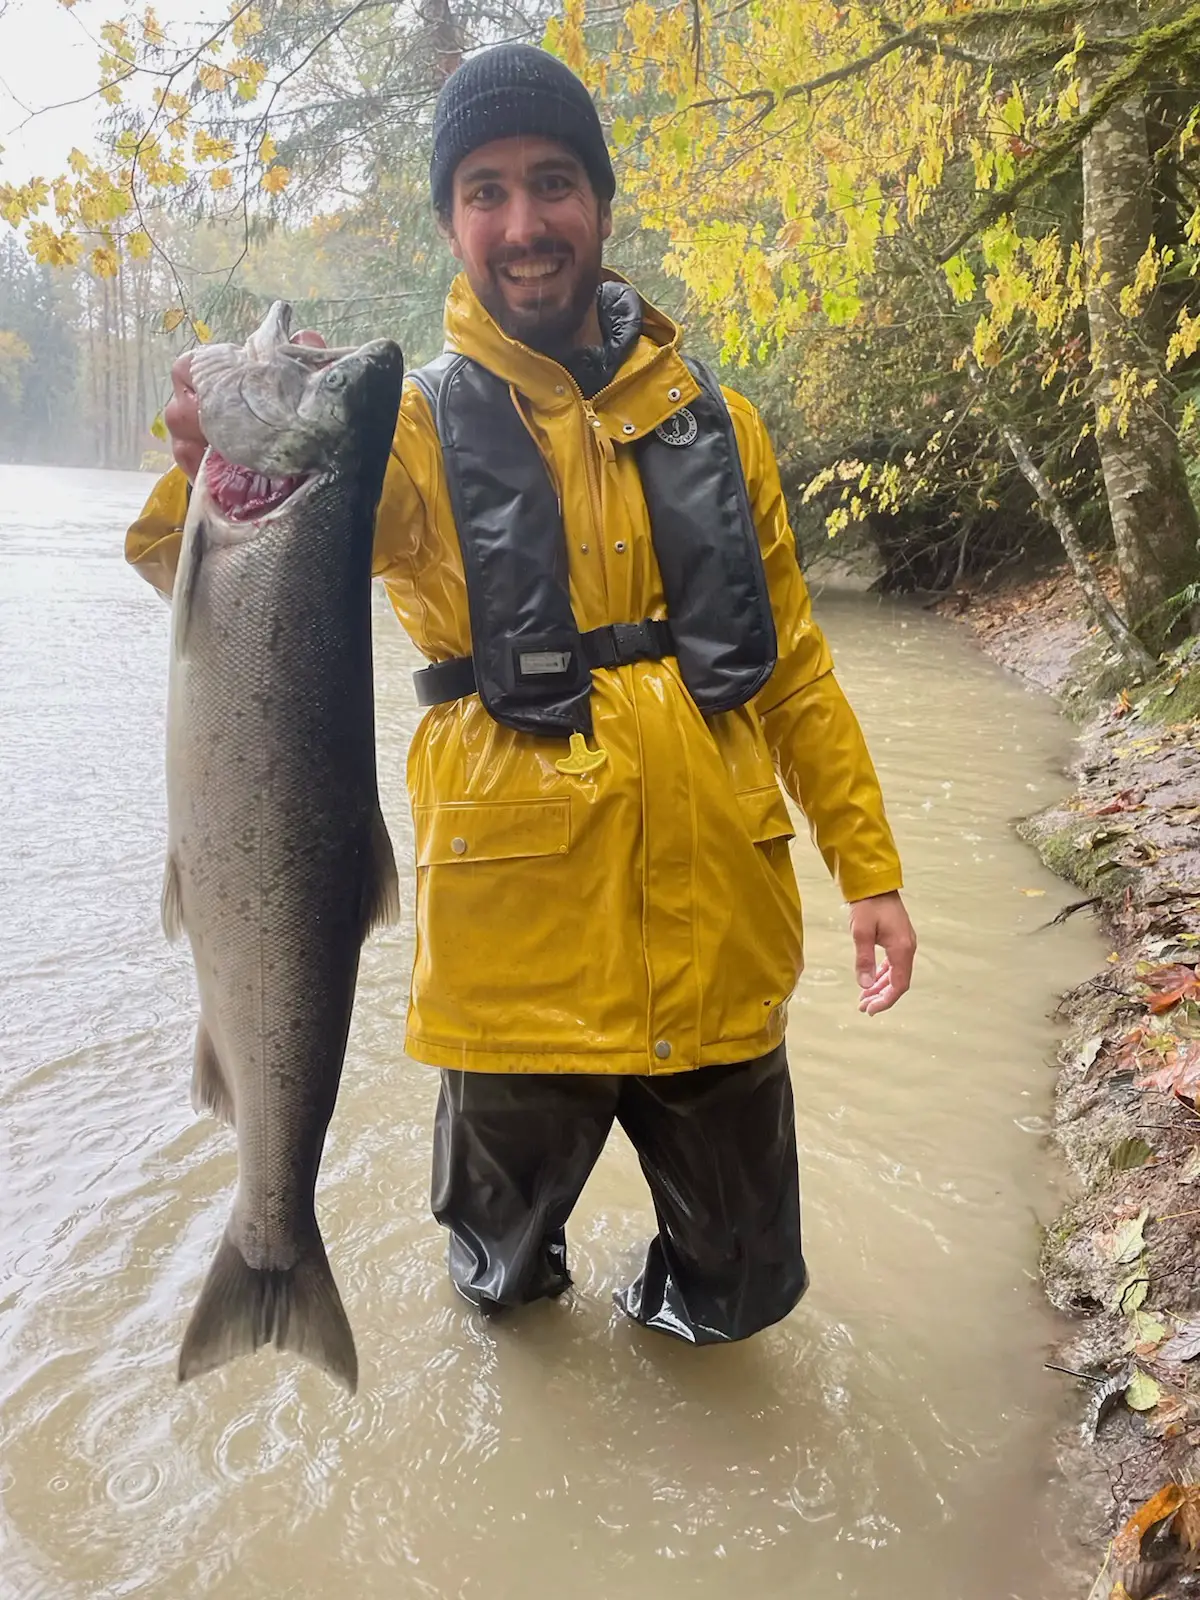 Coho salmon fishing in the Vedder River, British Columbia 